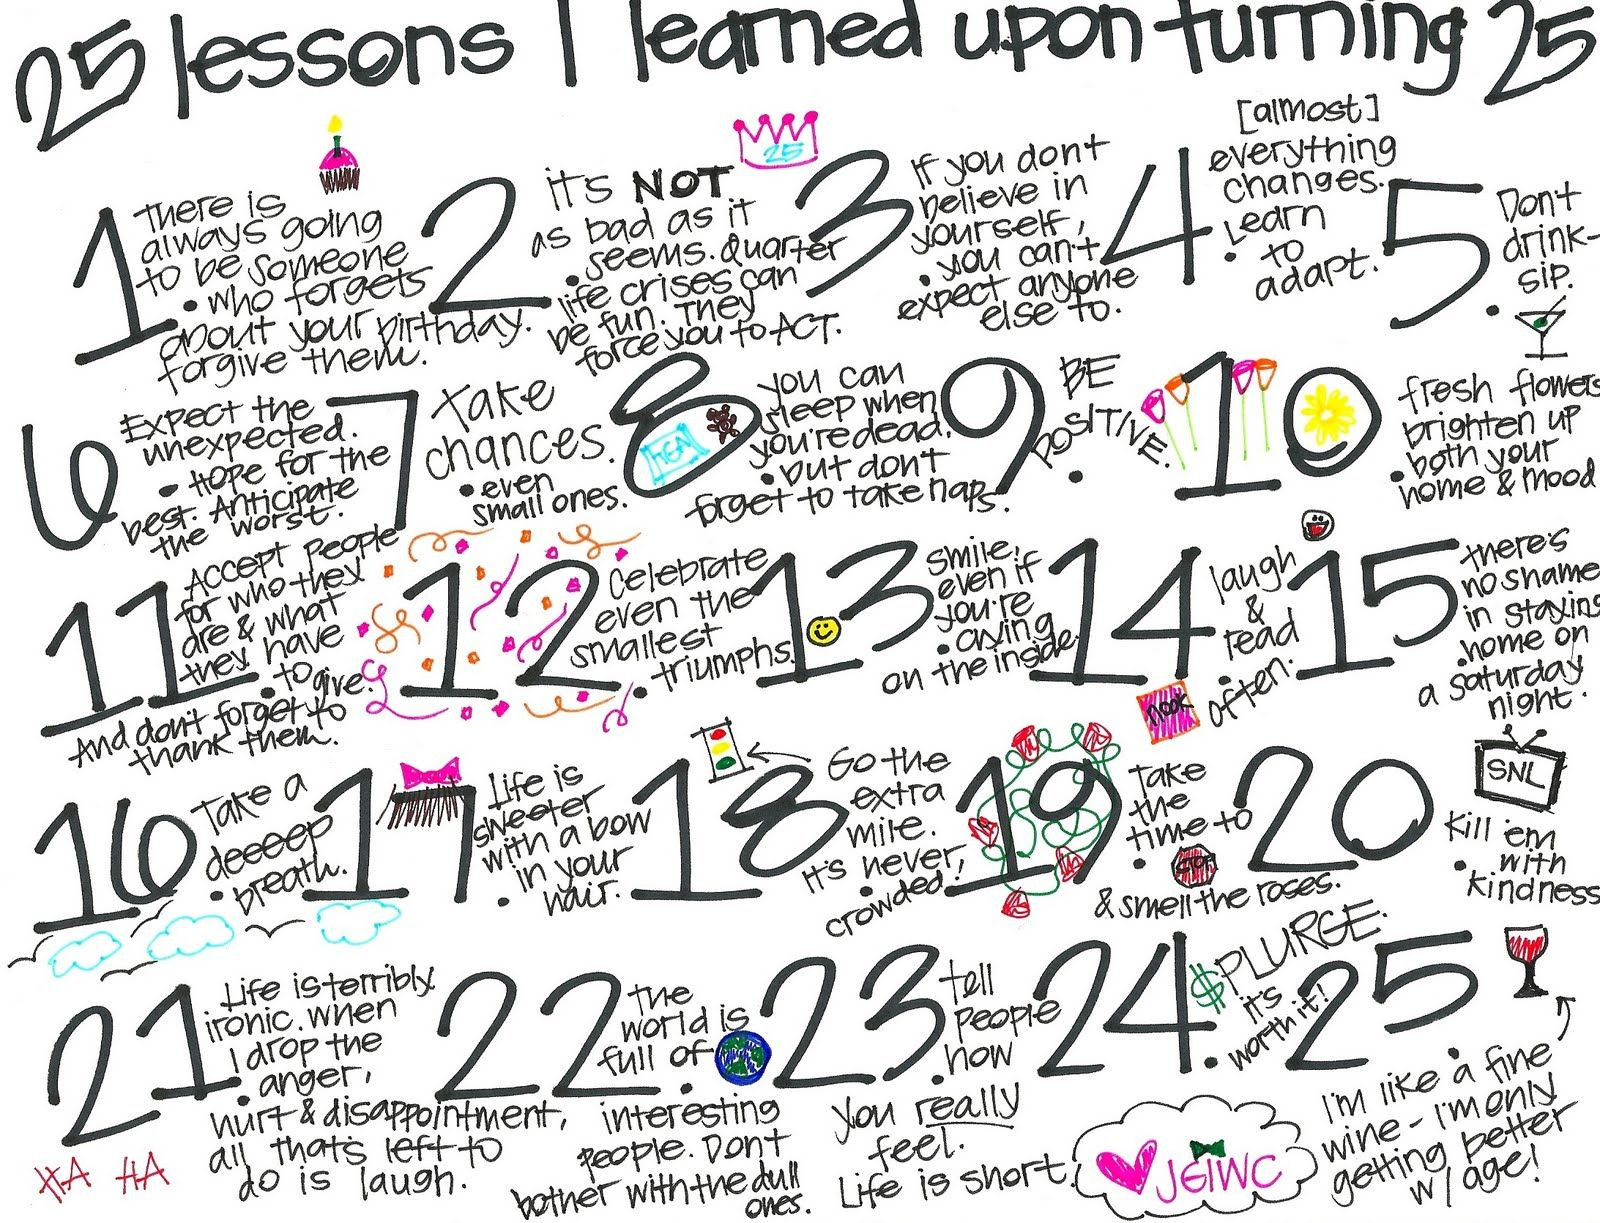 25 Birthday Quotes
 "25 lessons I learned upon turning 25" I am proud to say